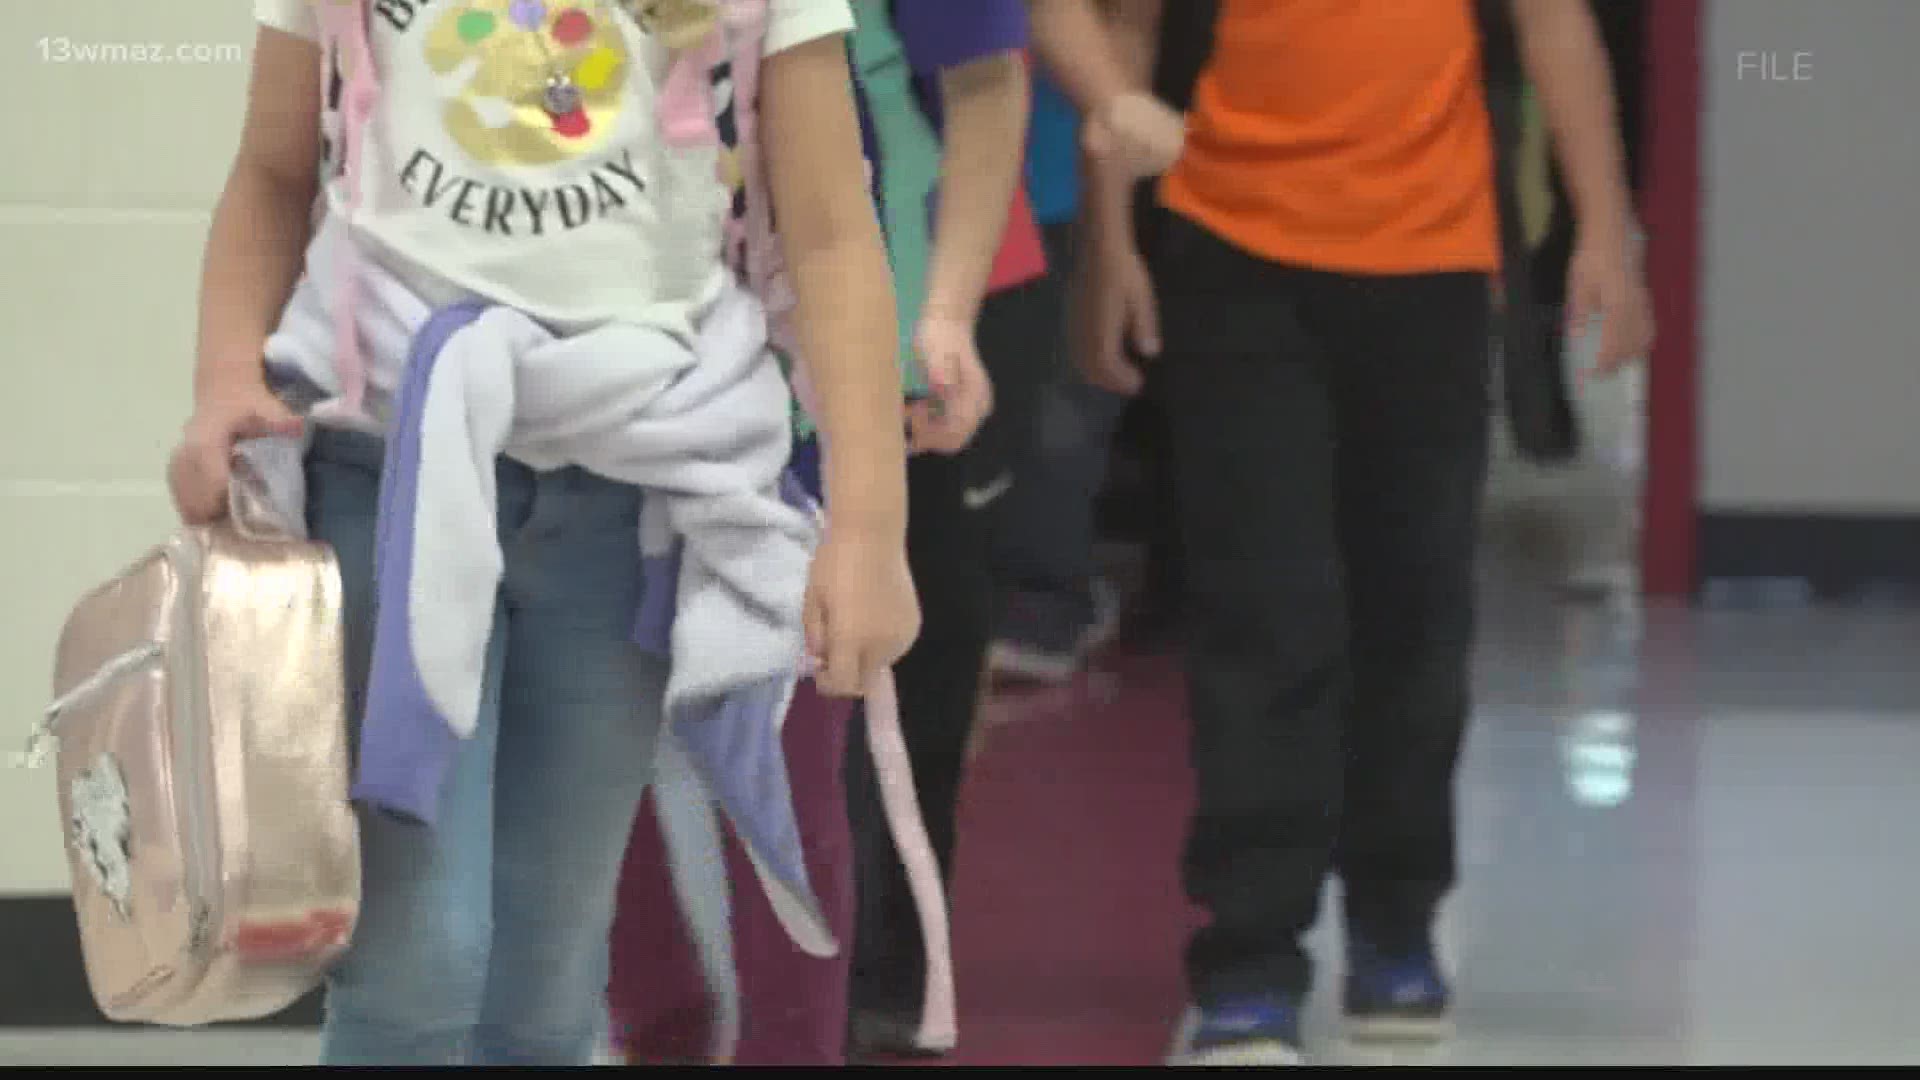 As more students in Central Georgia are set to head back to the classroom next week, 13WMAZ was asked what each district's policy is for face coverings in schools